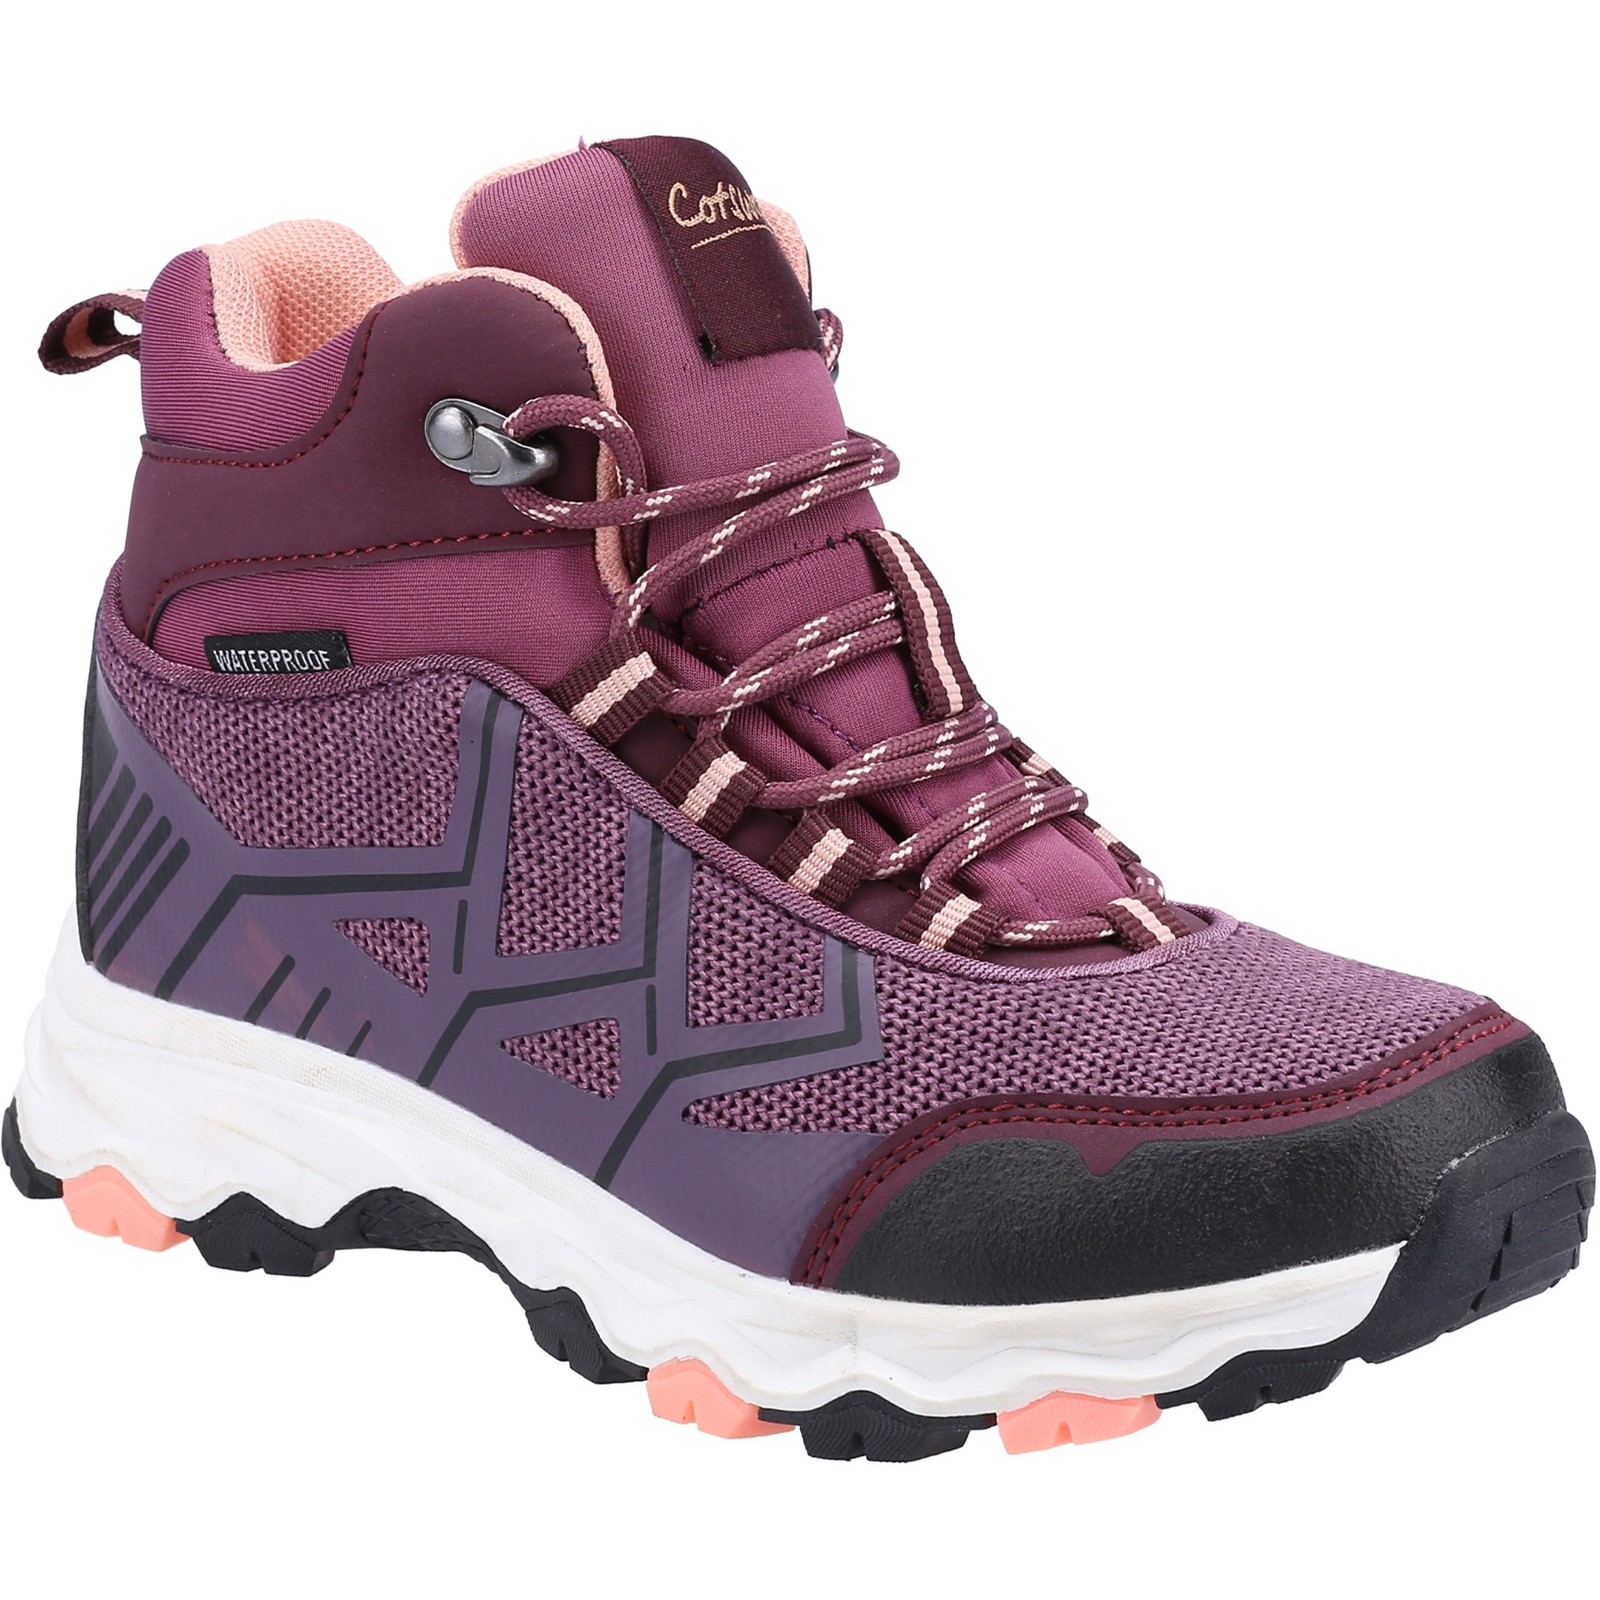 Coaley Lace Hiking Boots